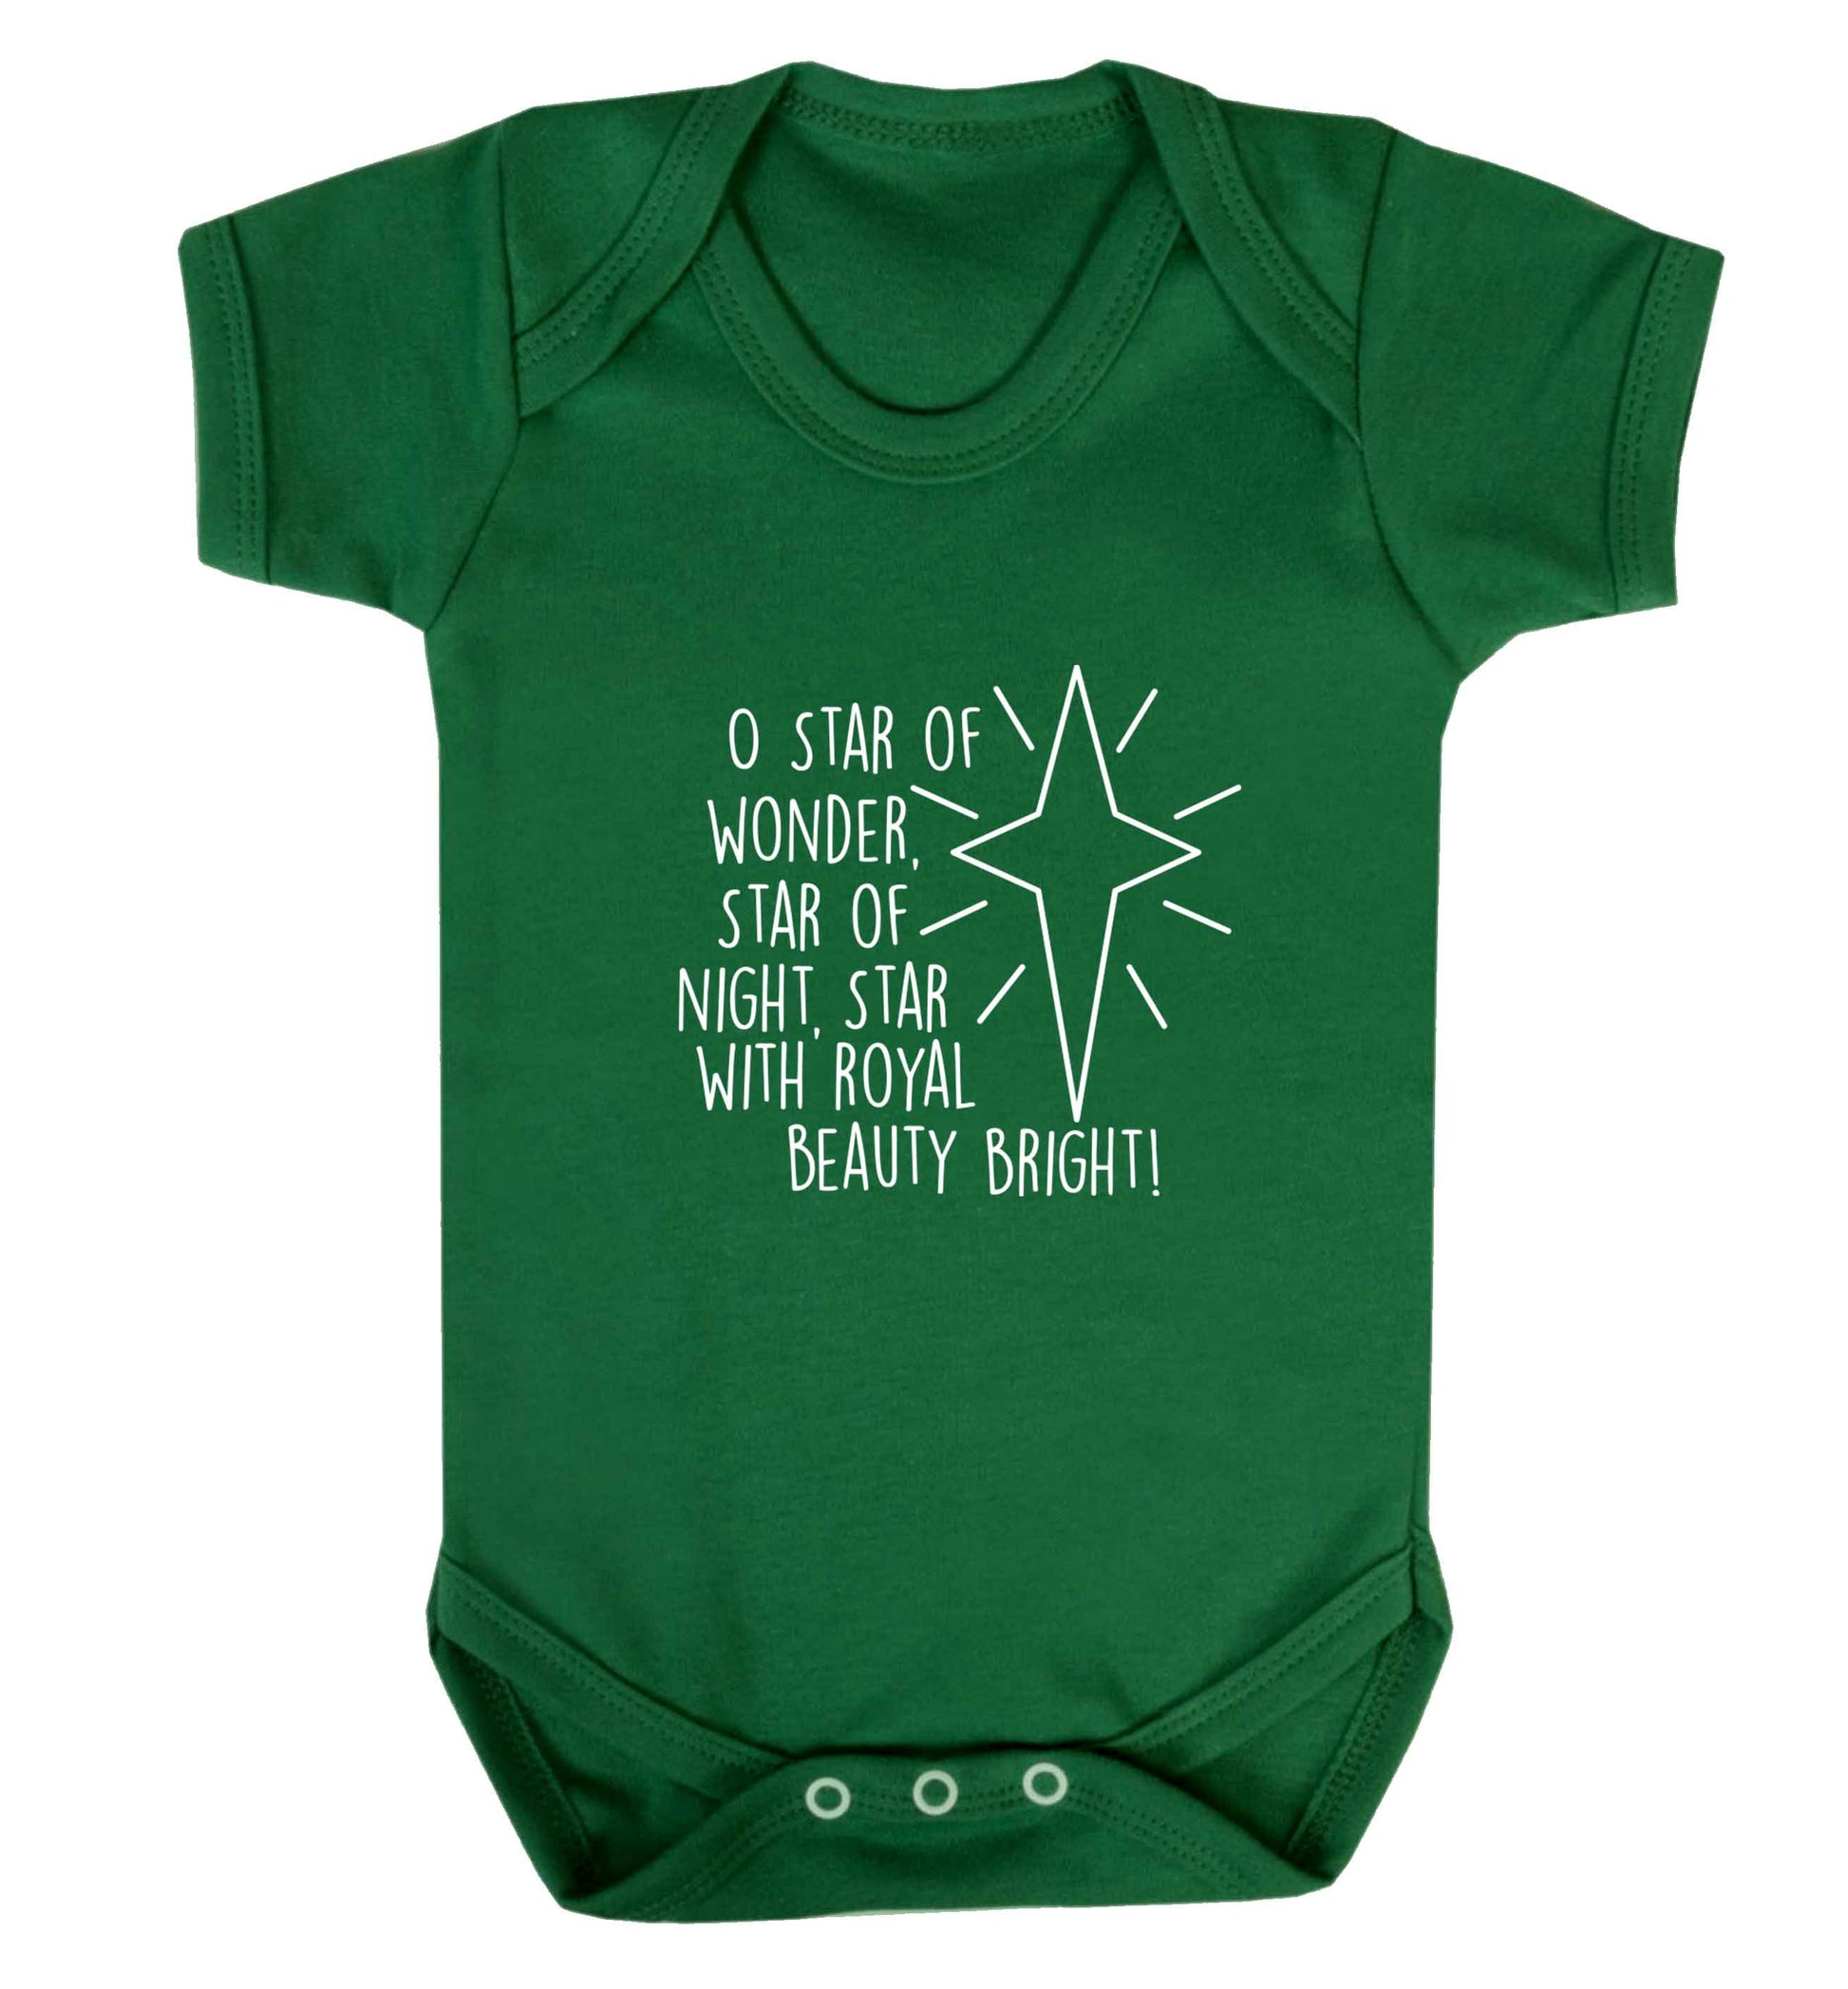 Oh star of wonder star of night, star with royal beauty bright baby vest green 18-24 months